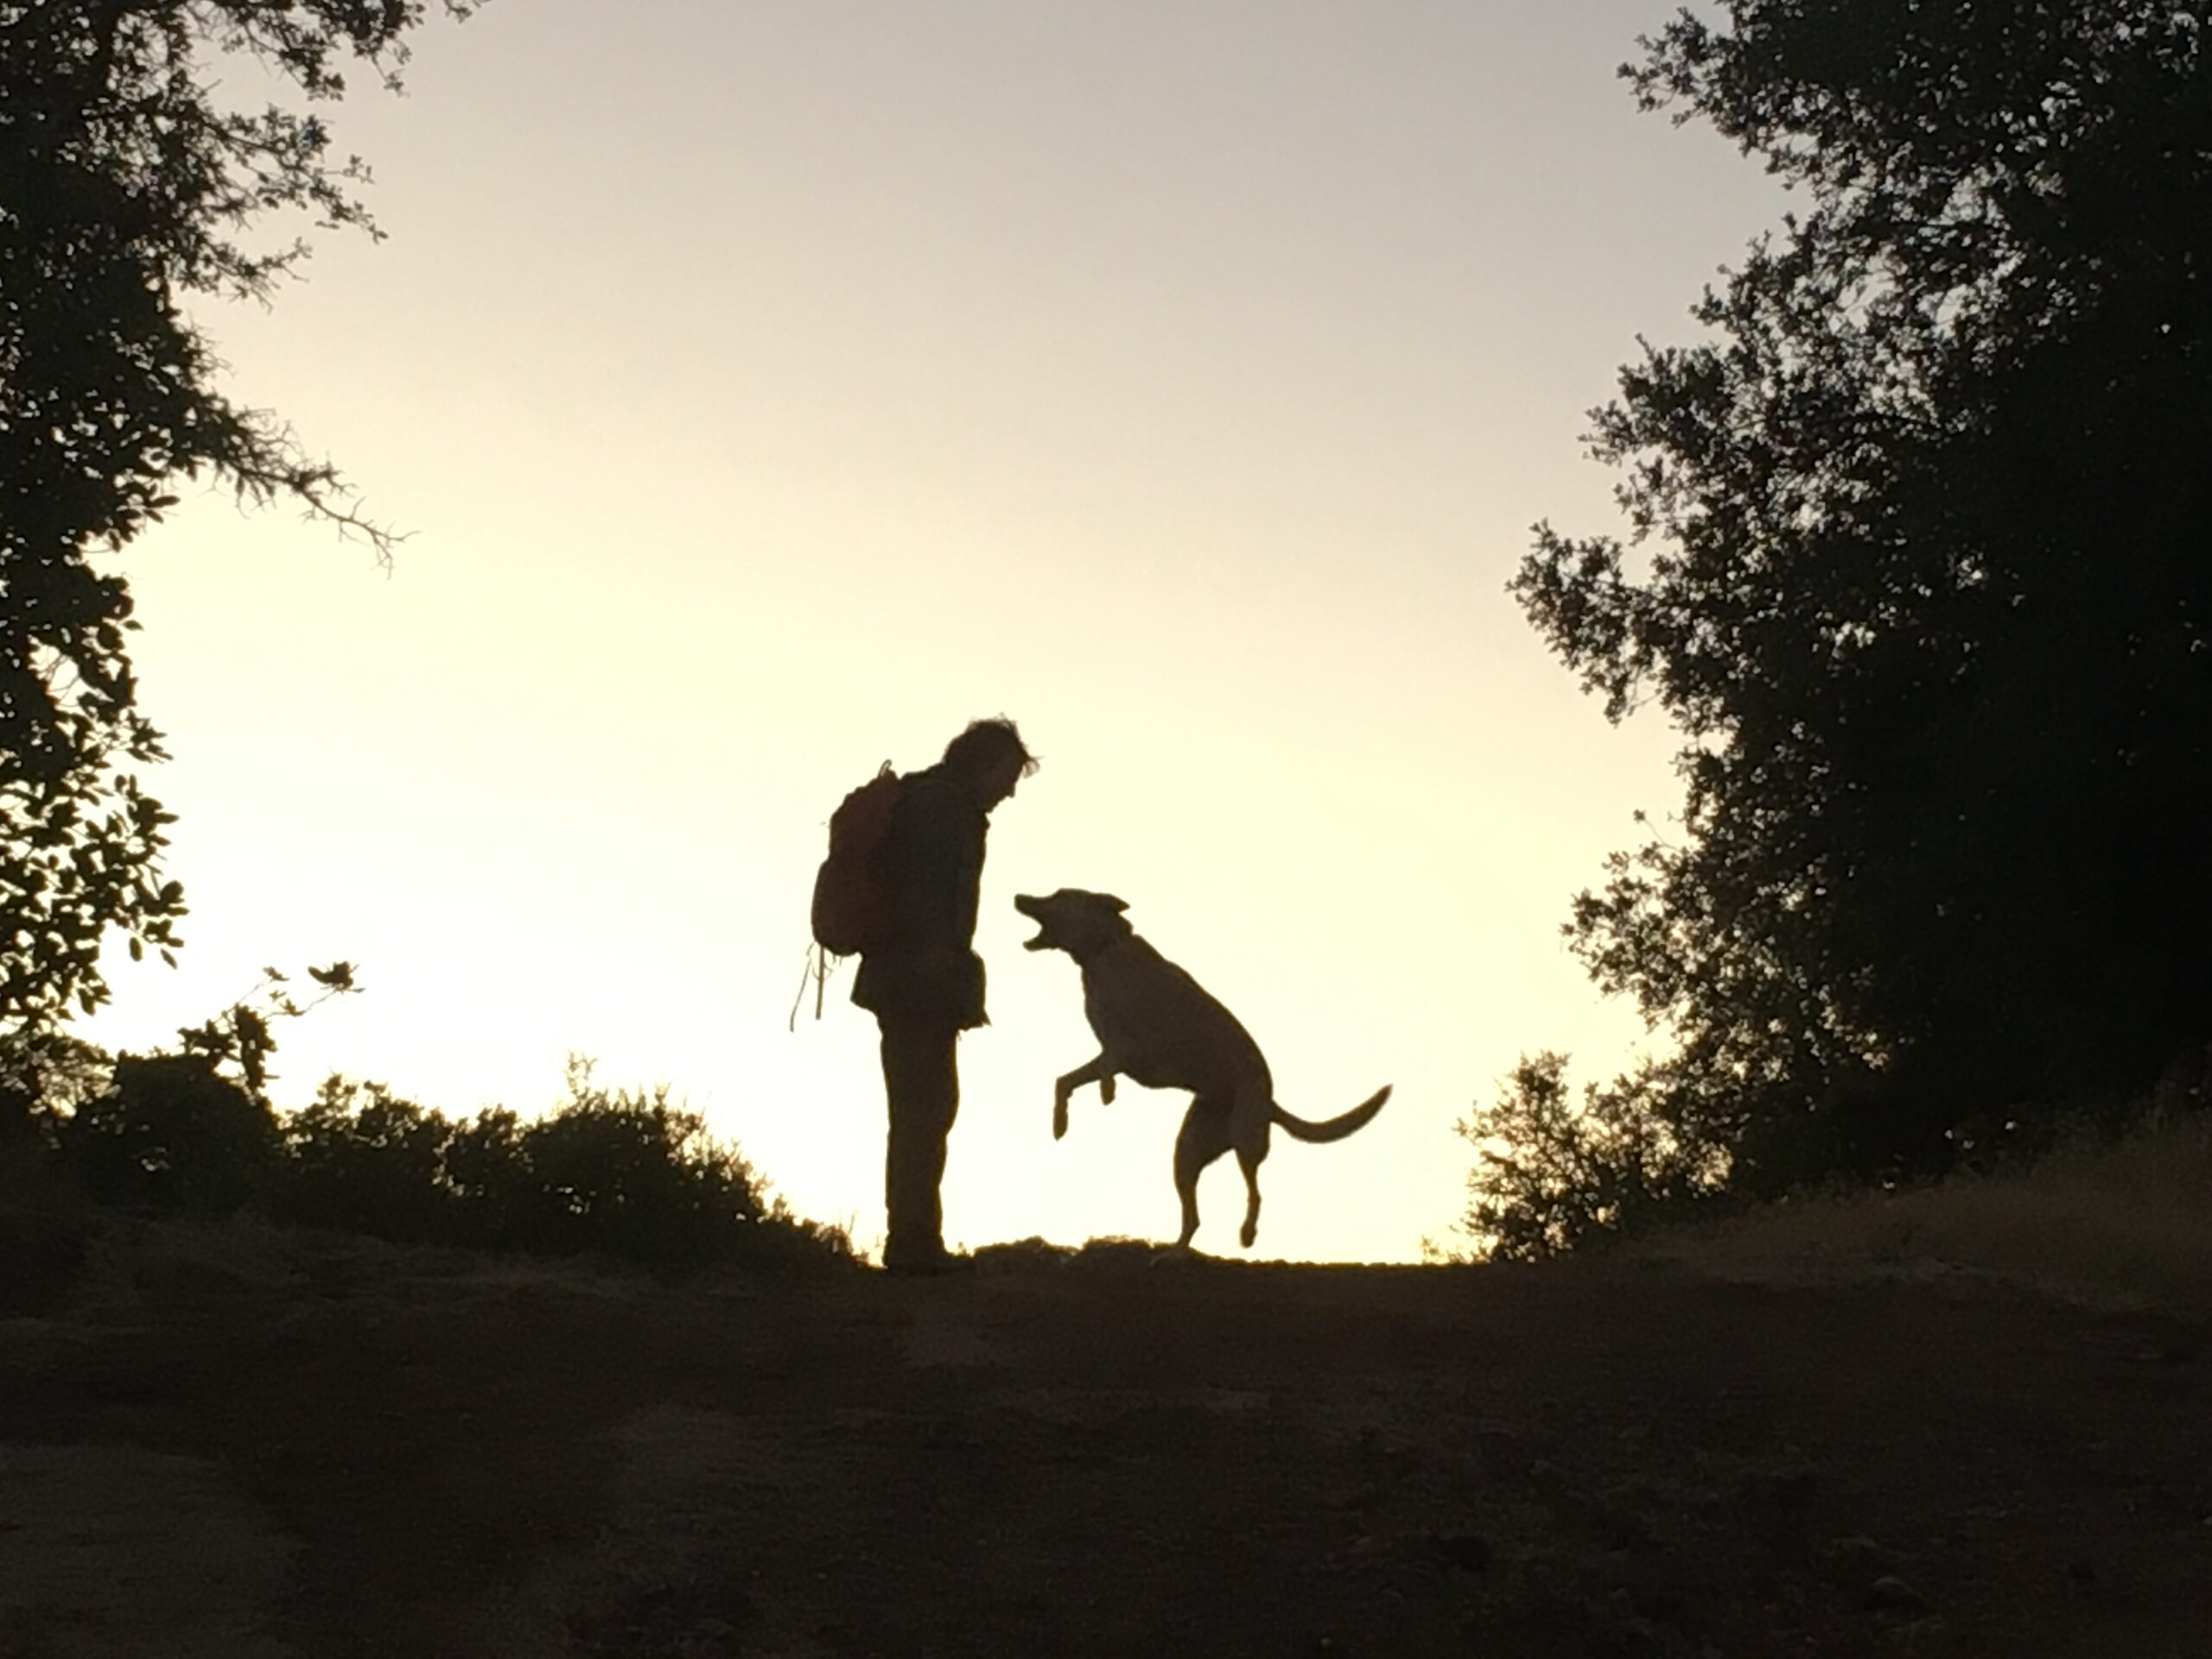 Silhouette of a man and dog on a trail at sunset.